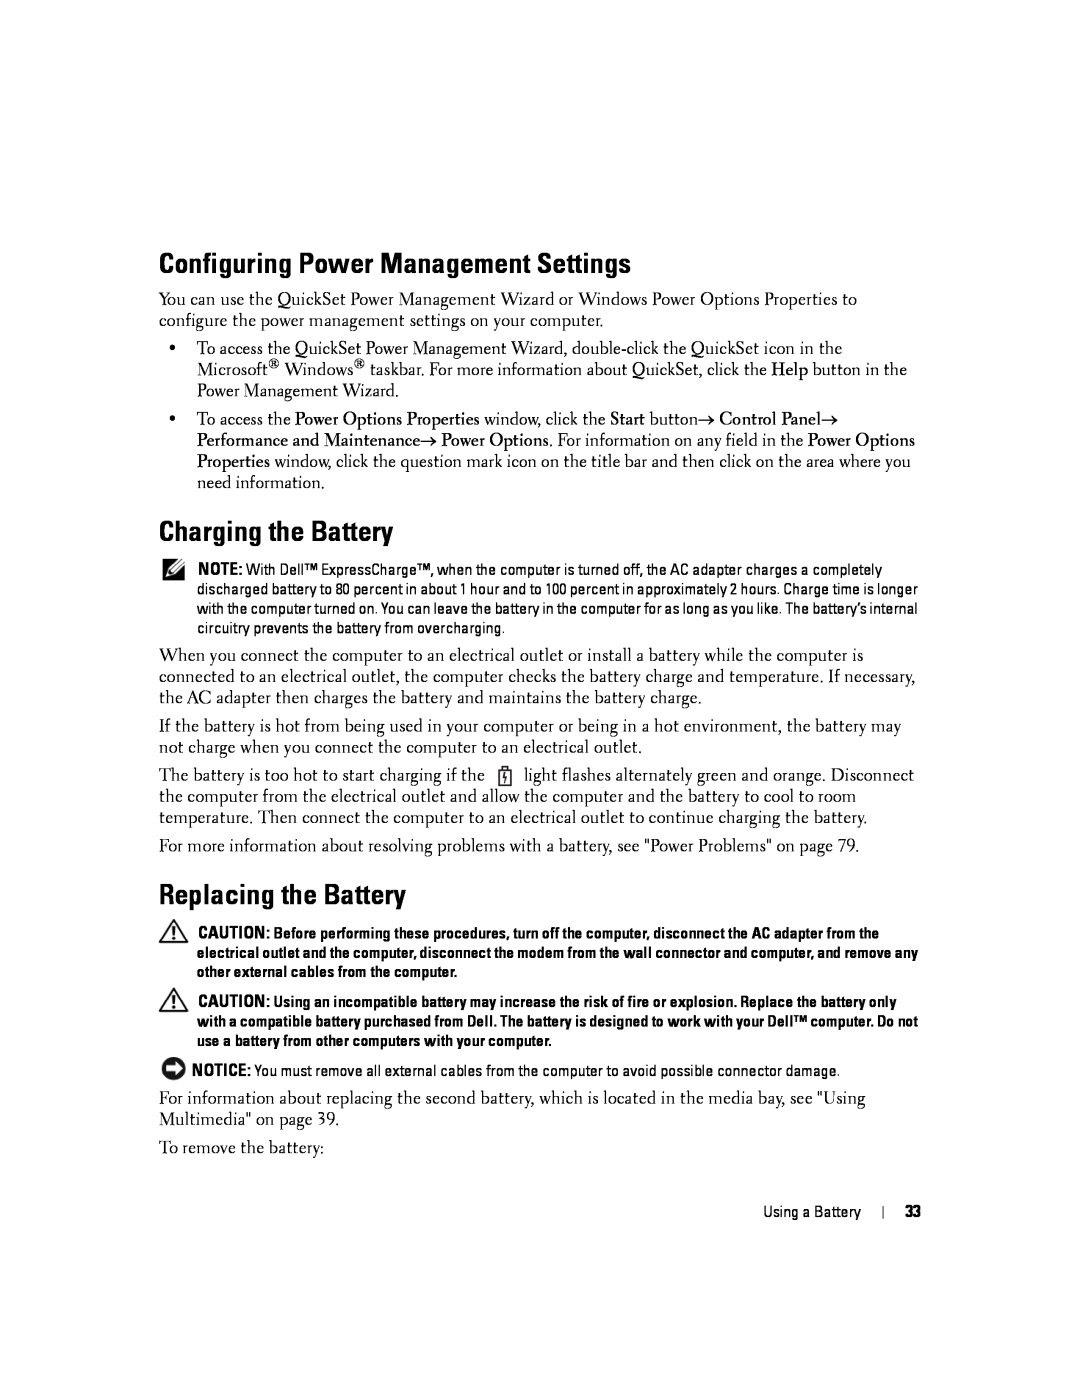 Dell D830, PP04X manual Configuring Power Management Settings, Charging the Battery, Replacing the Battery 